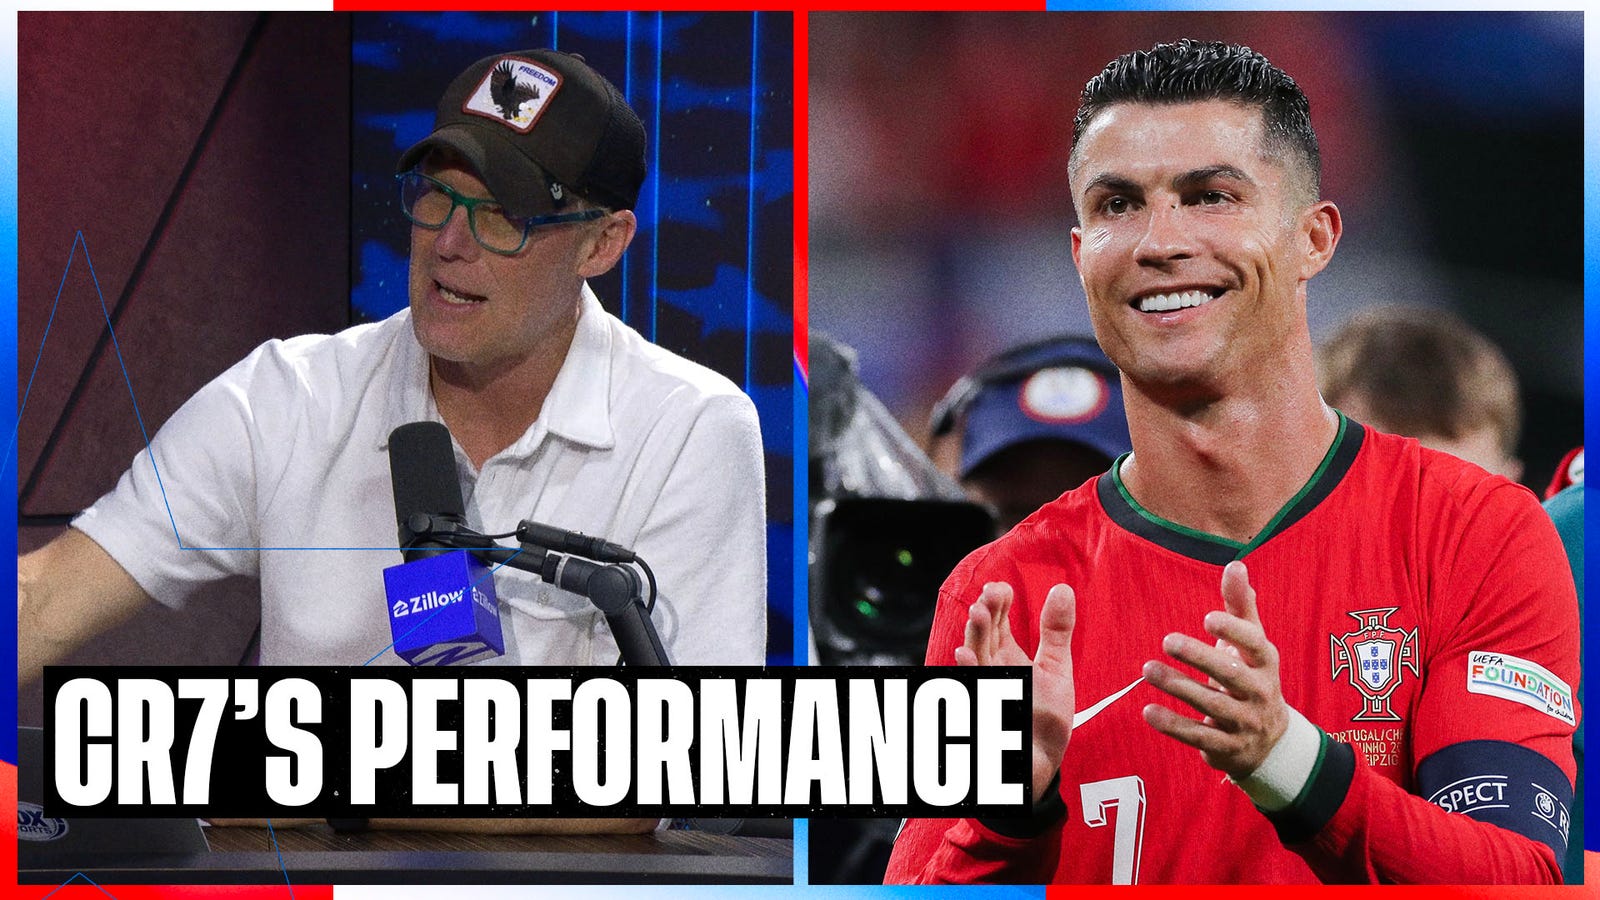 Did Cristiano Ronaldo impress or disappoint for Portugal in opening match vs. Czechia?